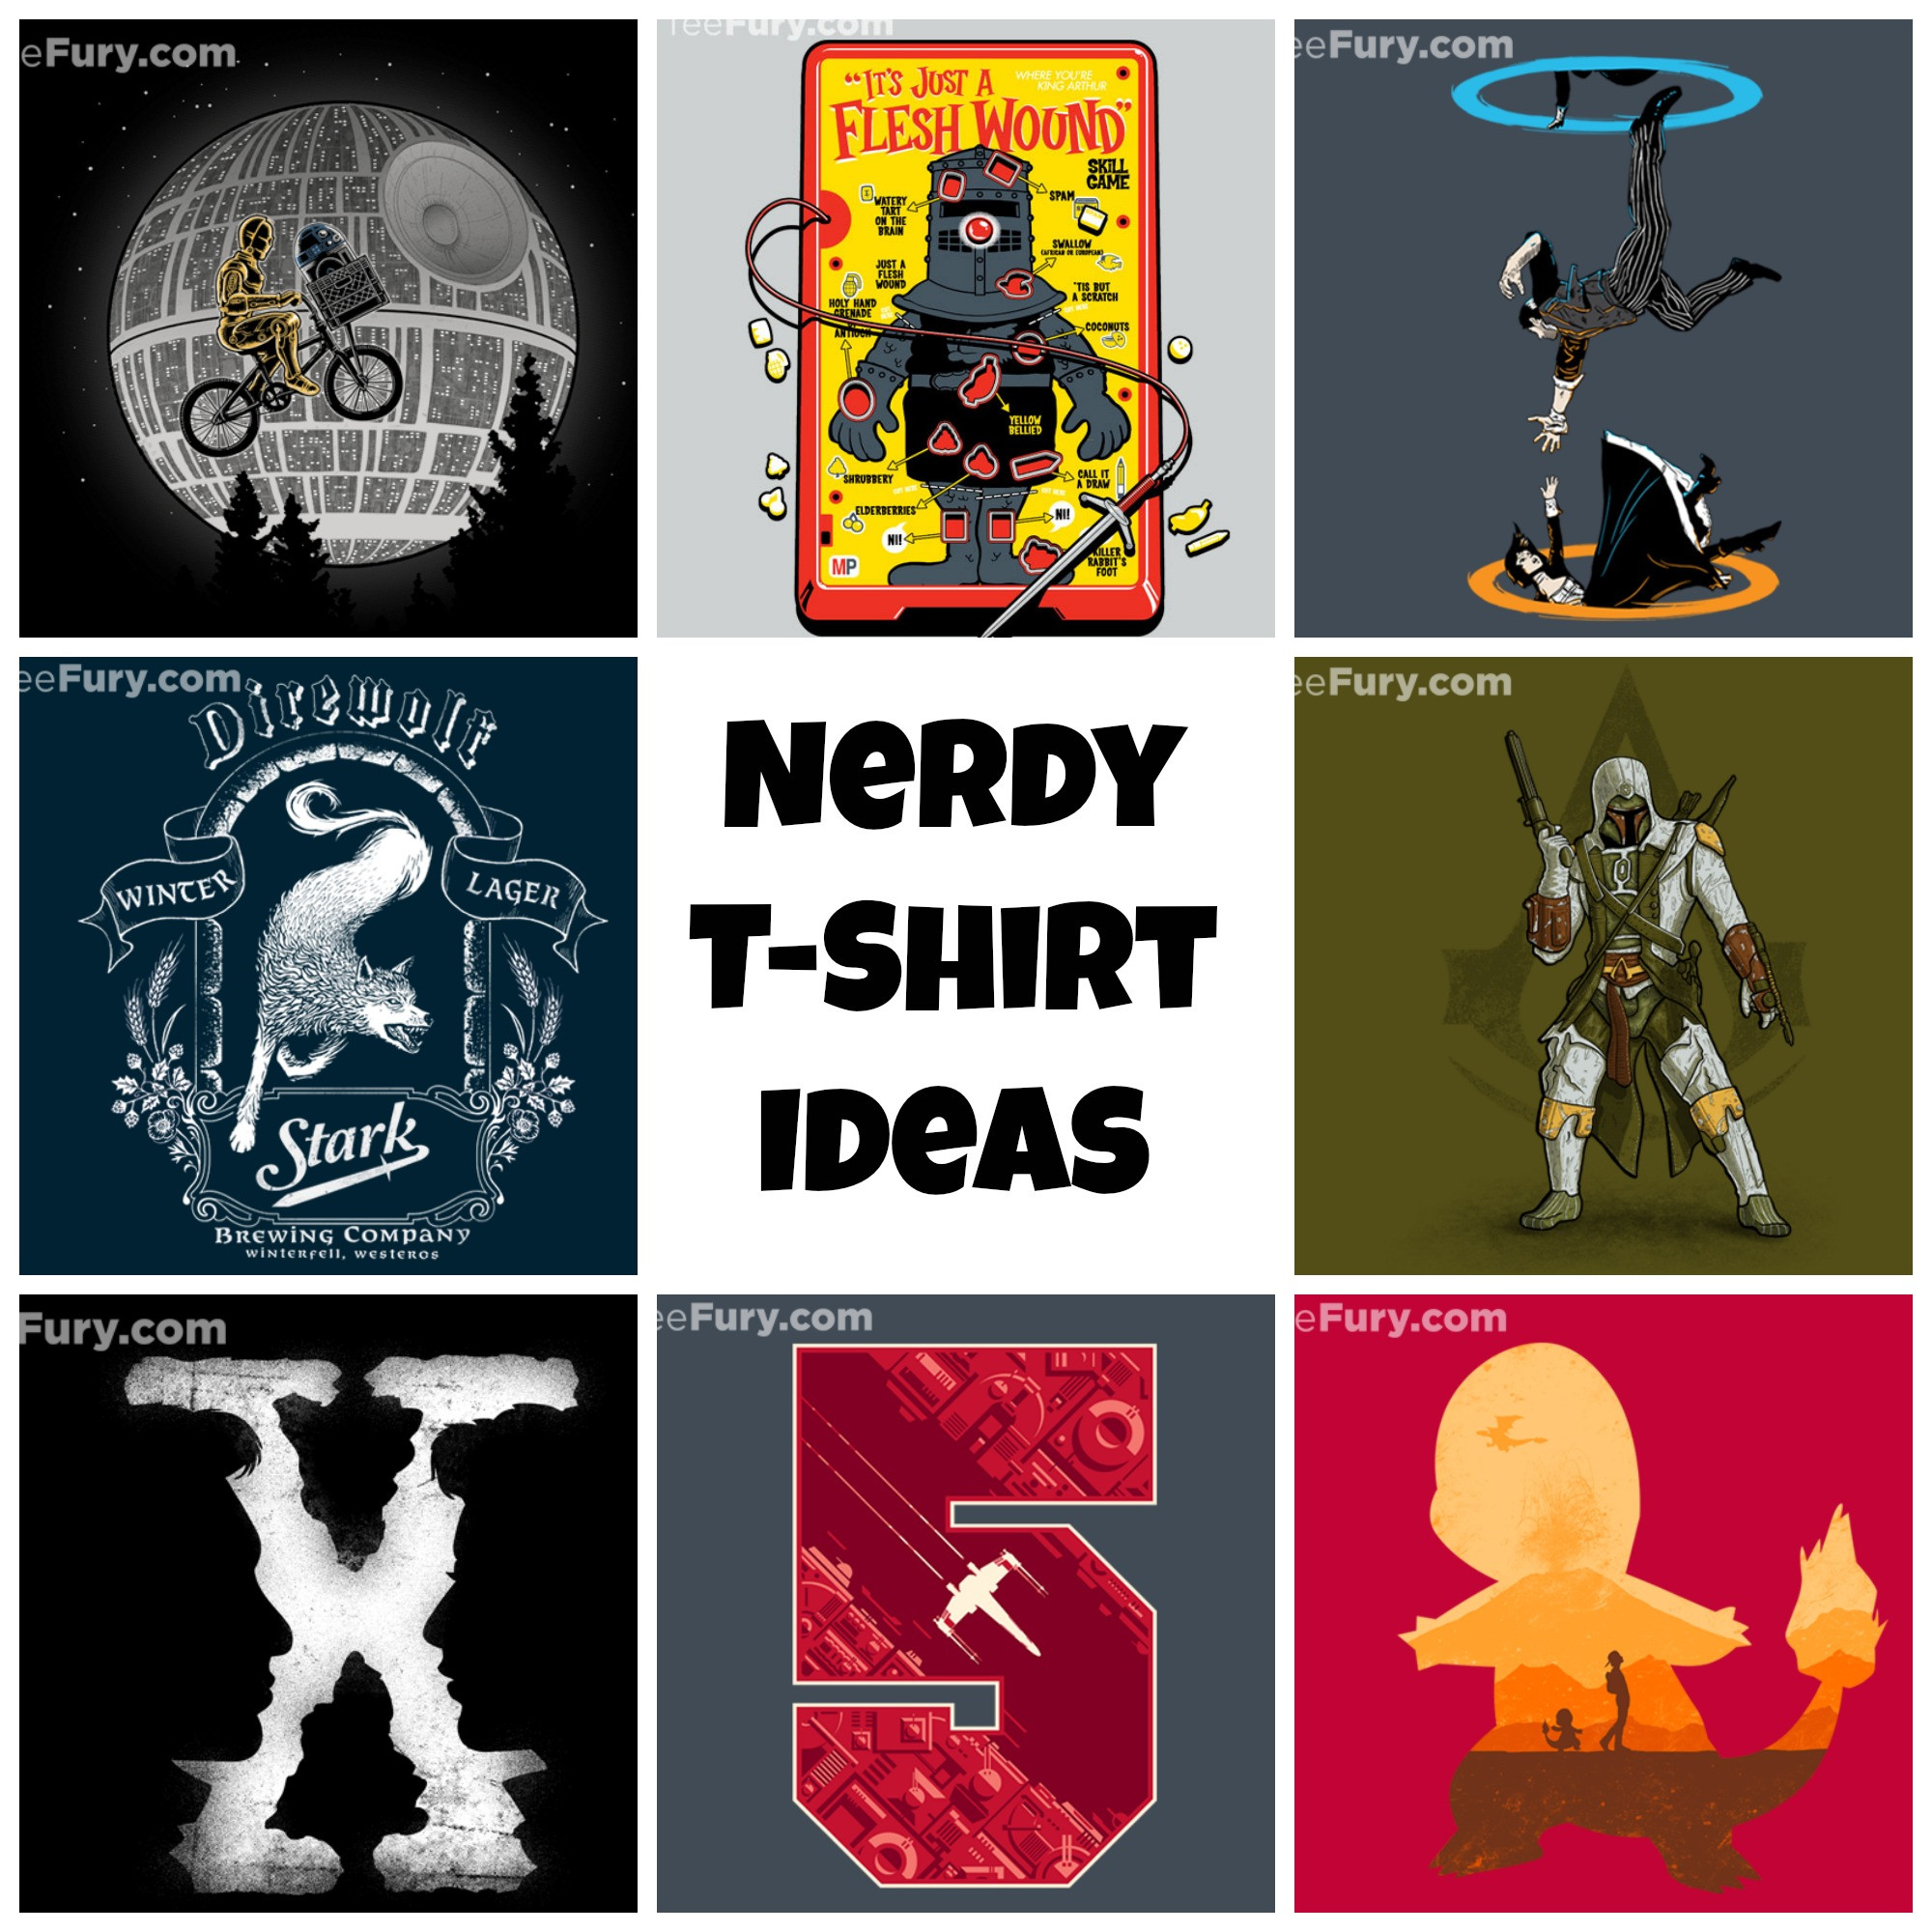 Gift Ideas For Nerdy Girlfriend
 Nerdy T shirt Gift Ideas for the Nerd in your Life